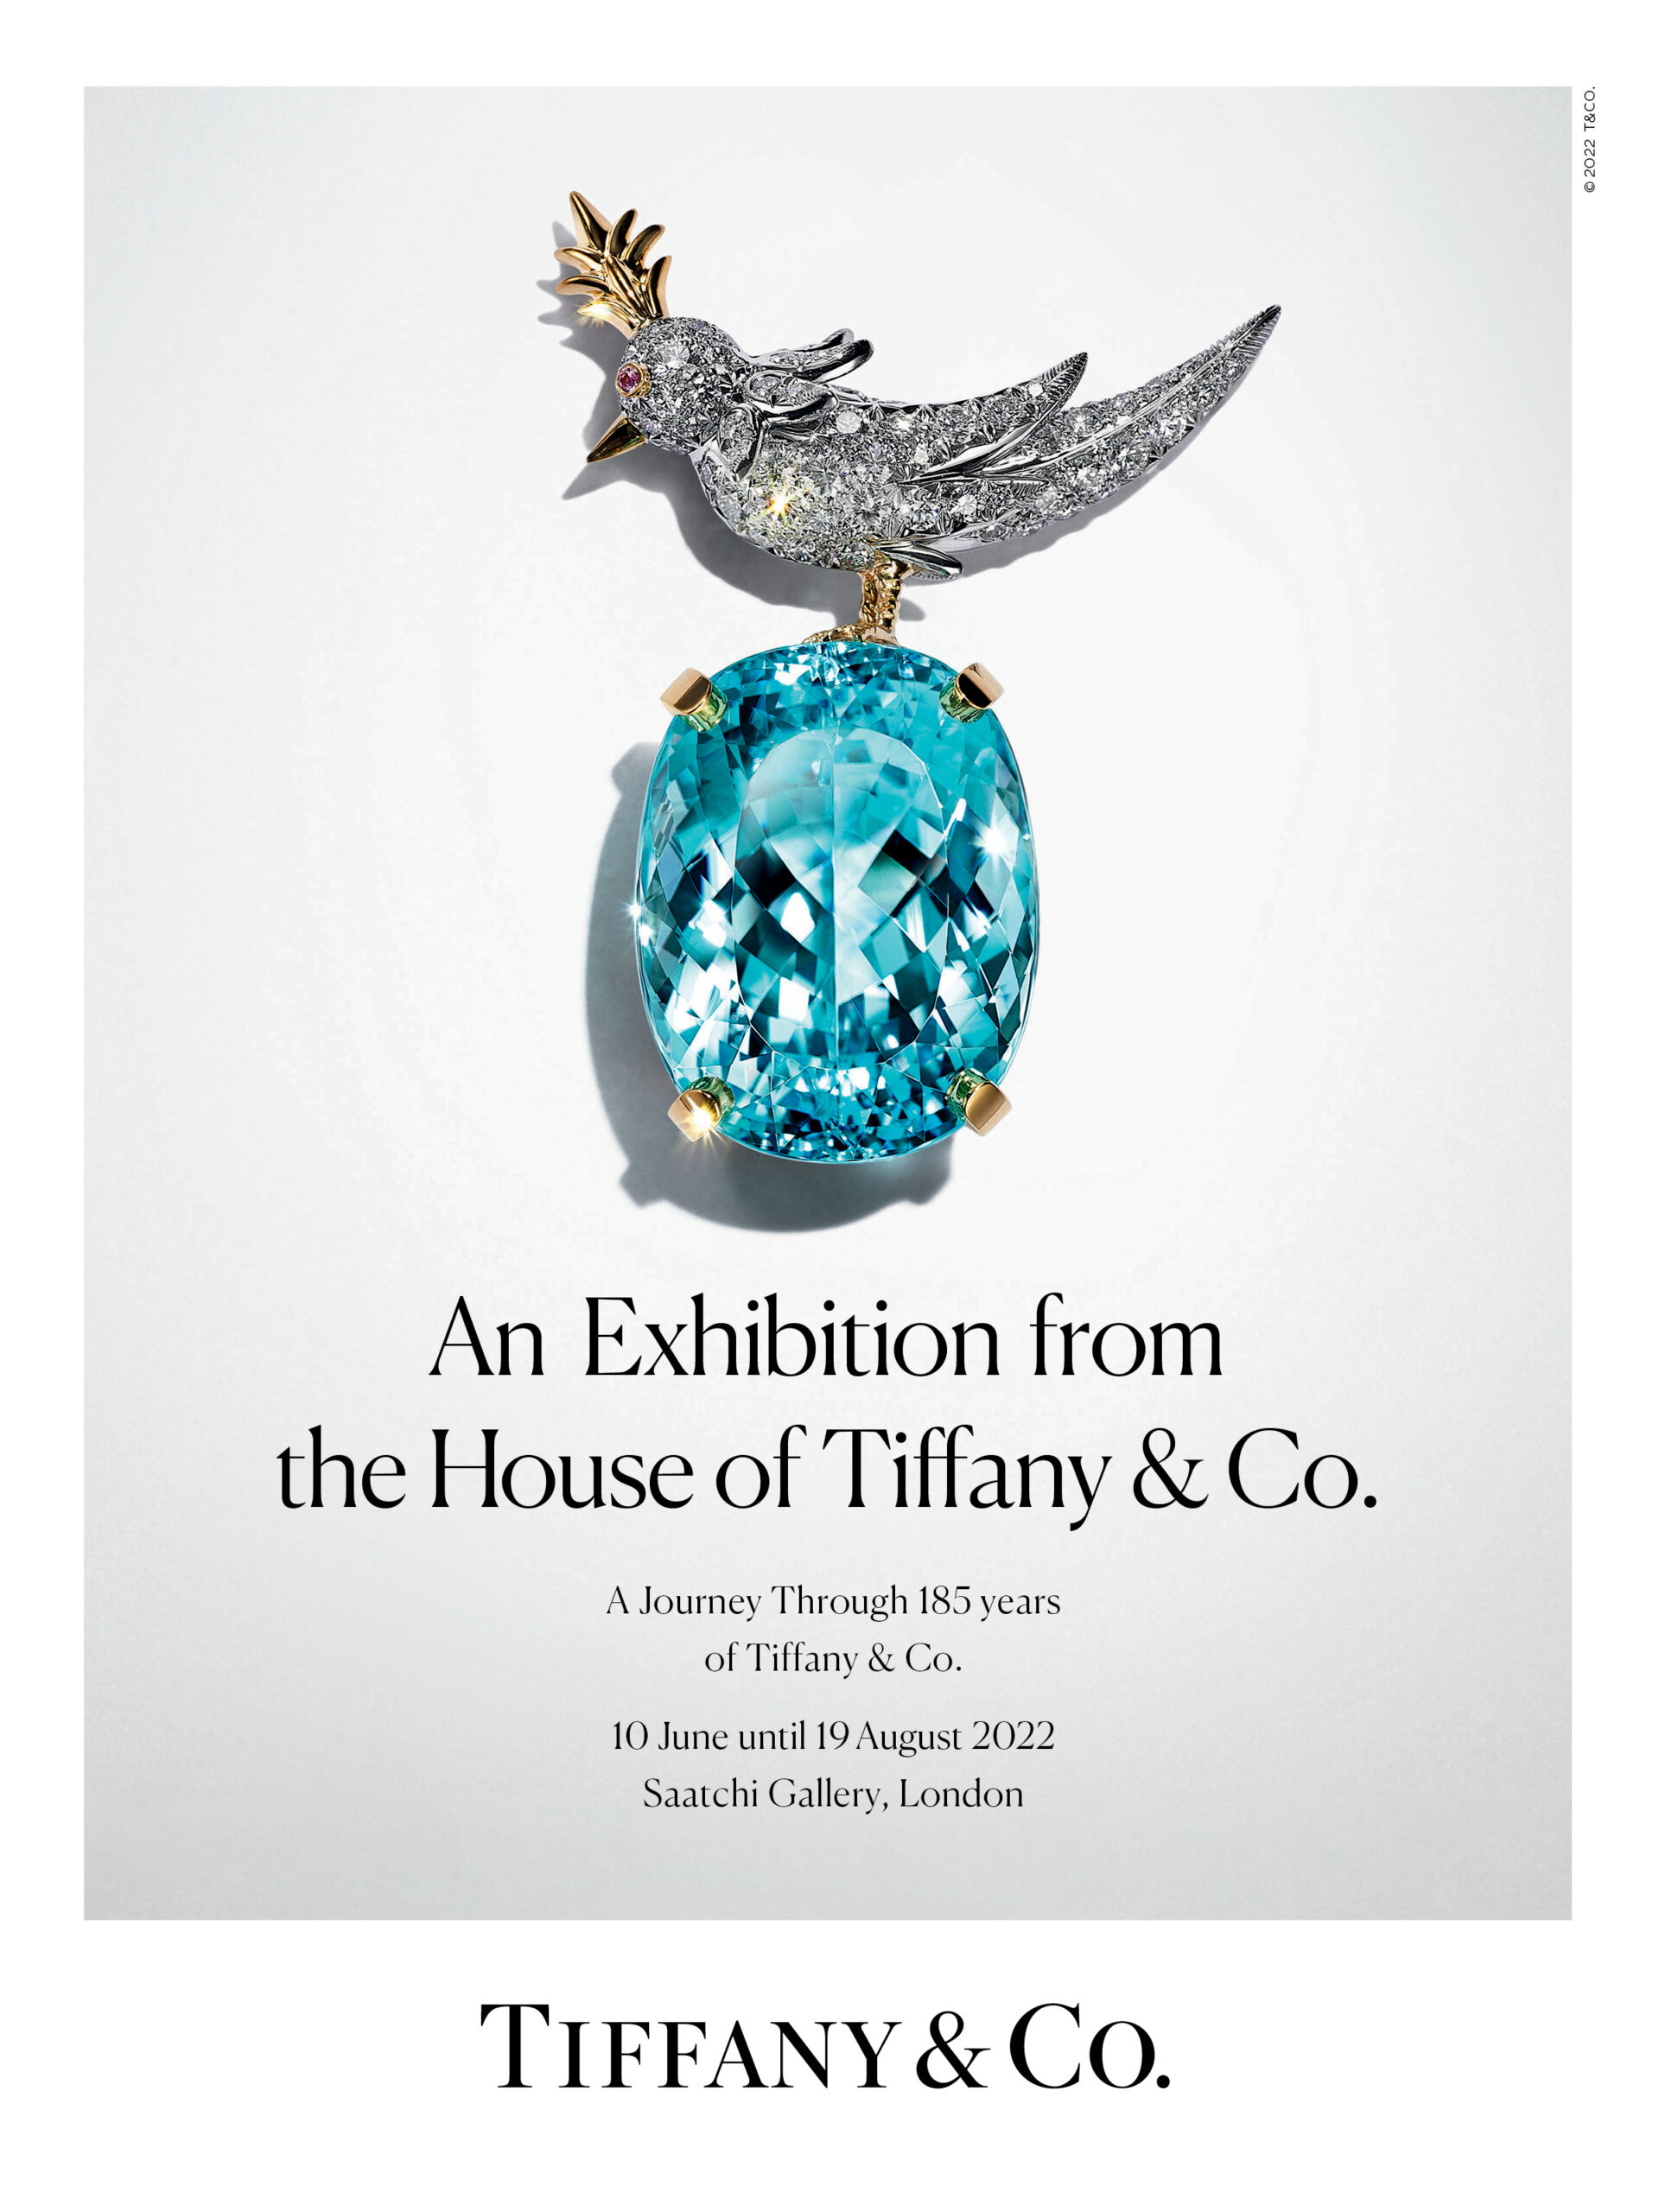 Tiffany & Co. launches an iconic exhibition at Saatchi Gallery in